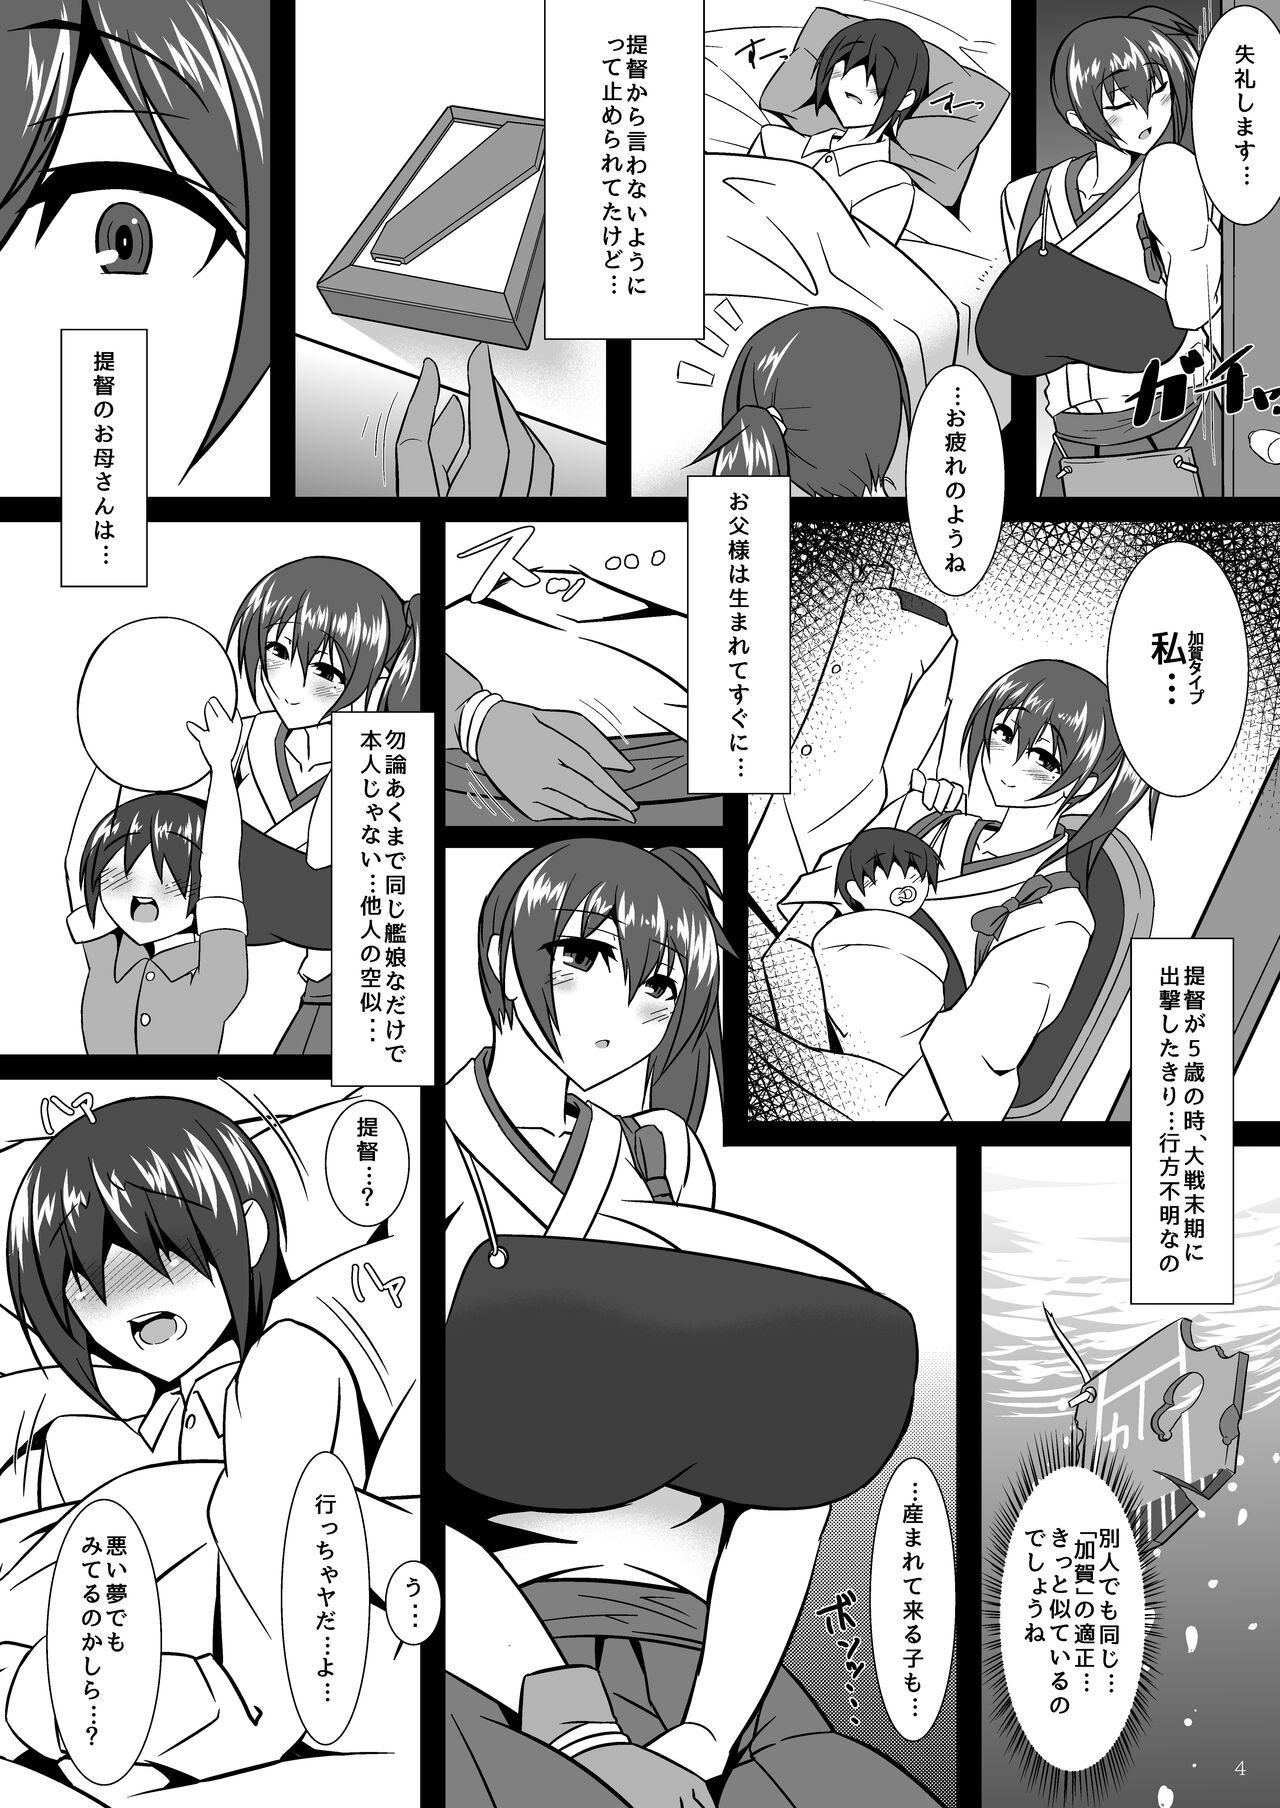 Petite Teenager Bote Colle 4 - Kantai collection Russian - Page 4